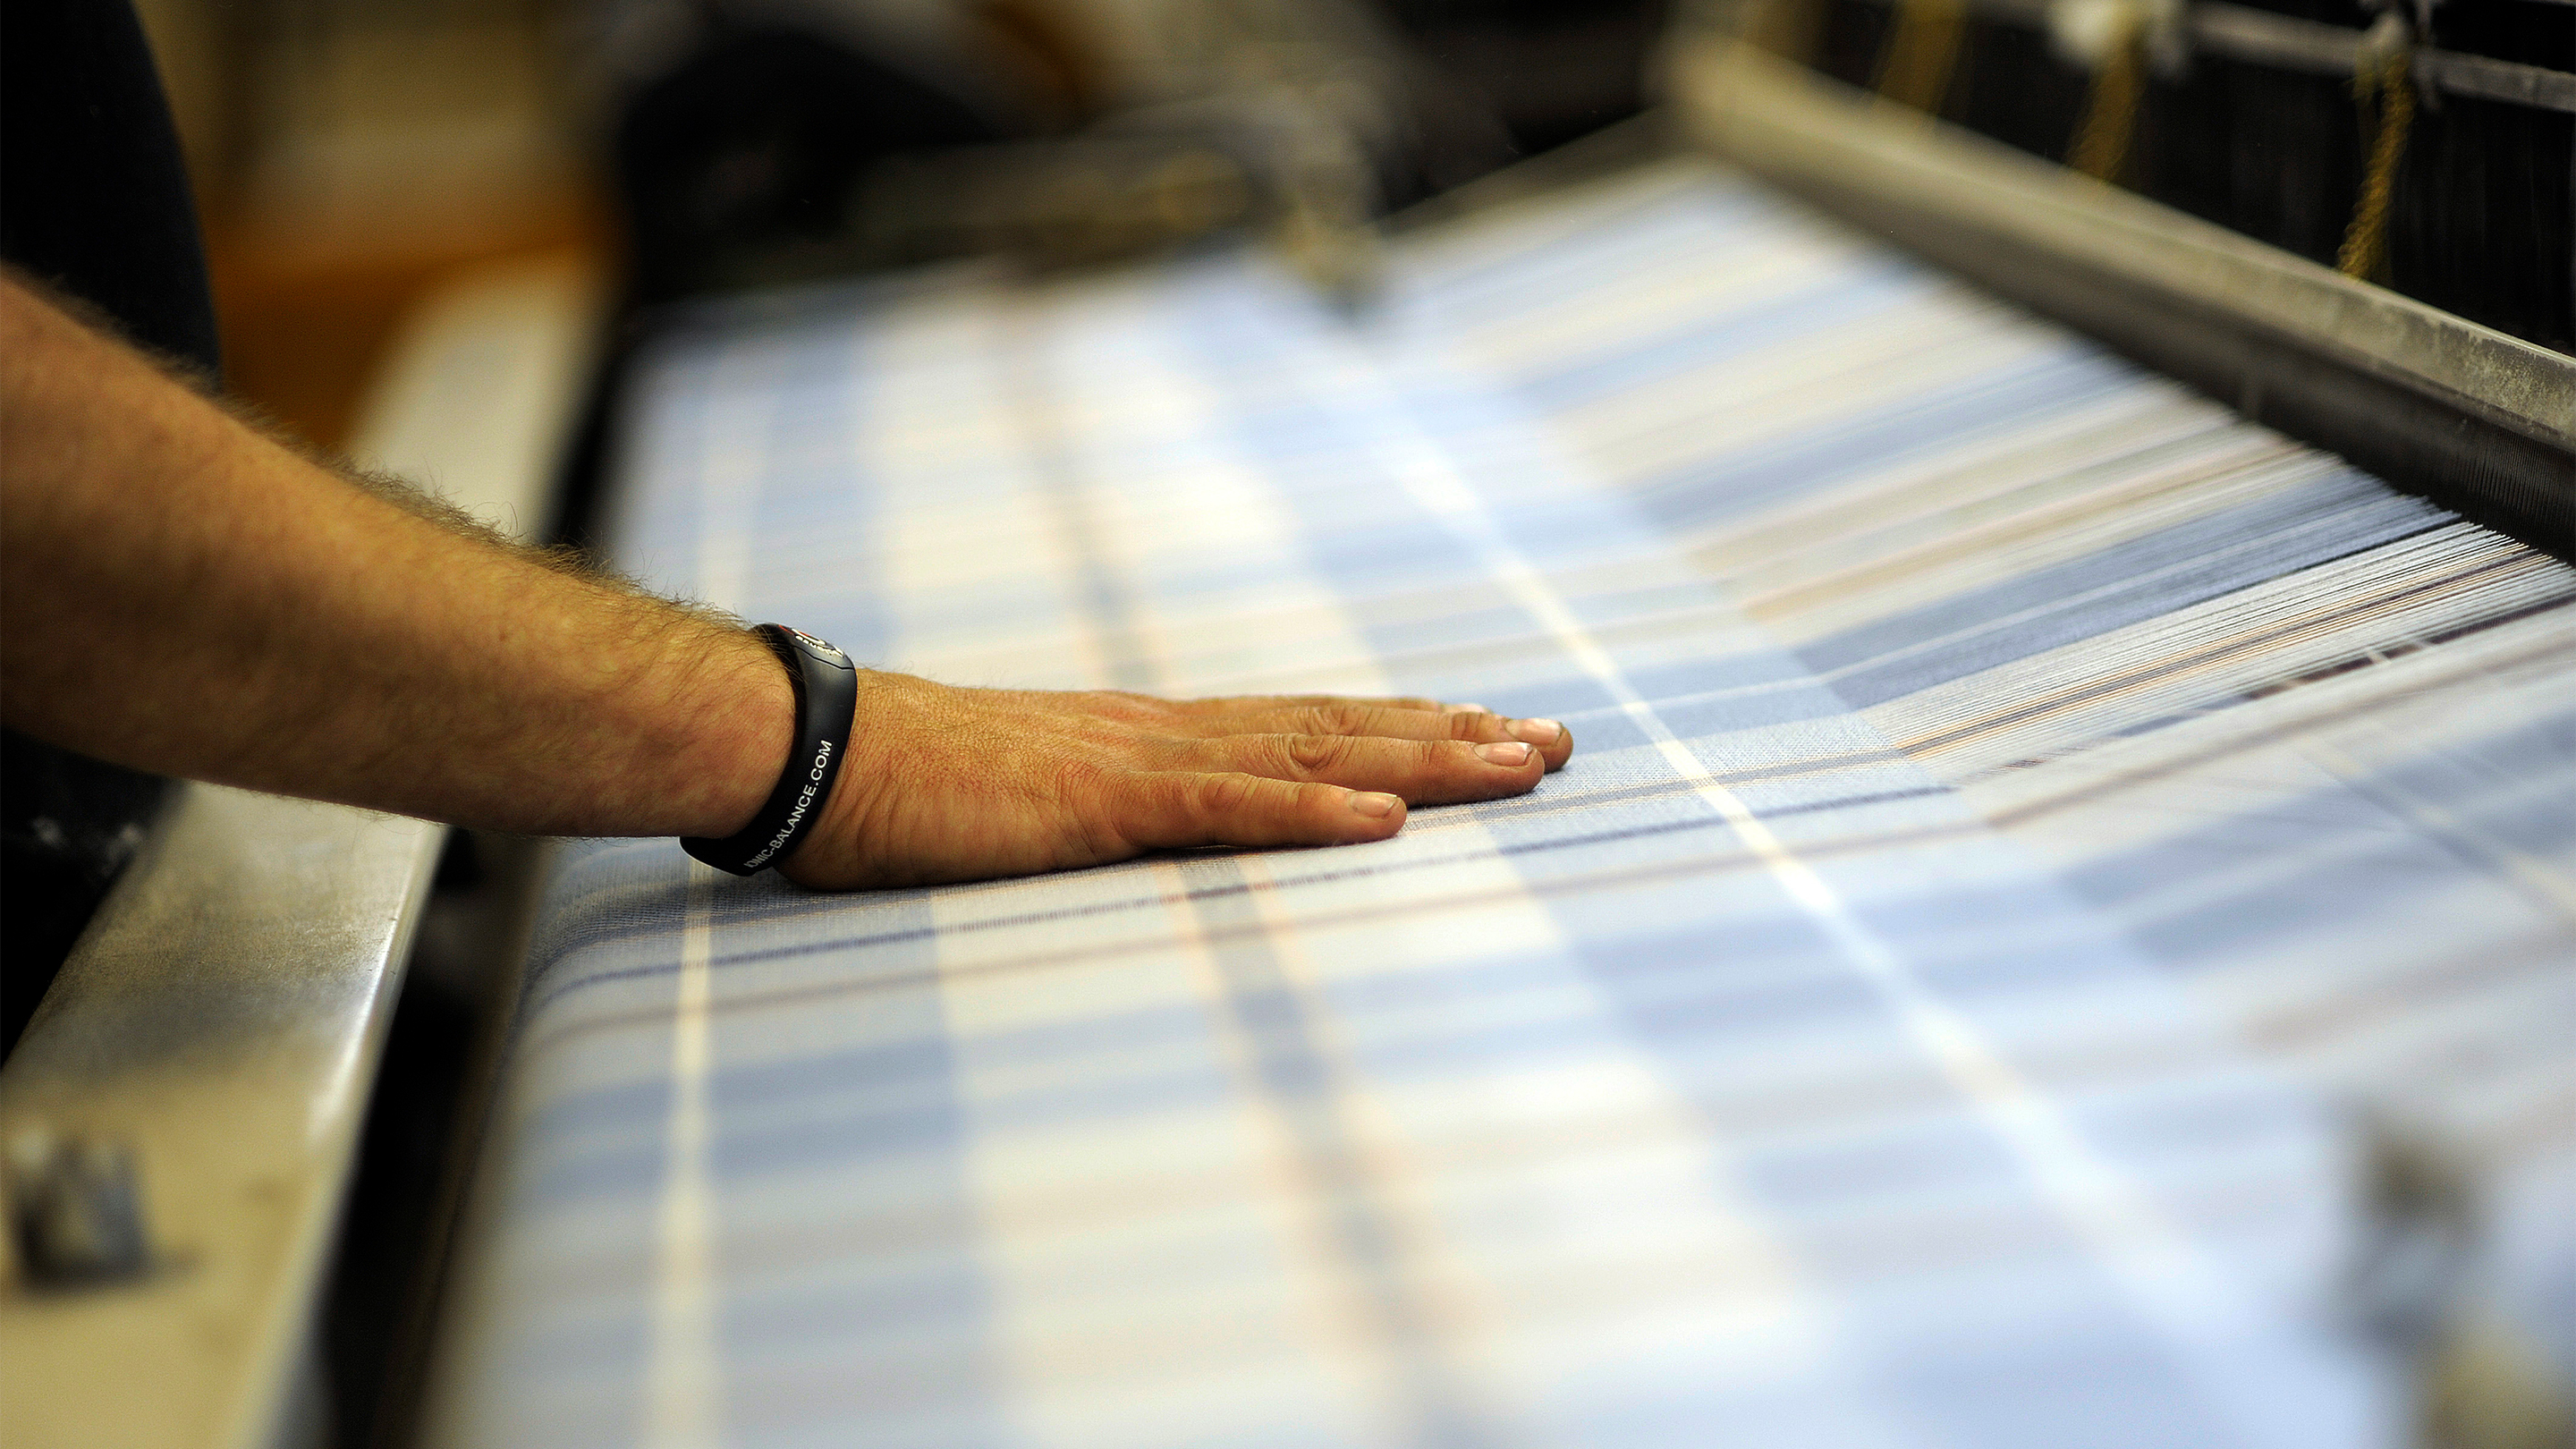 Covid-19: The Catalyst for the Renaissance of UK Textile and Clothing Industry.